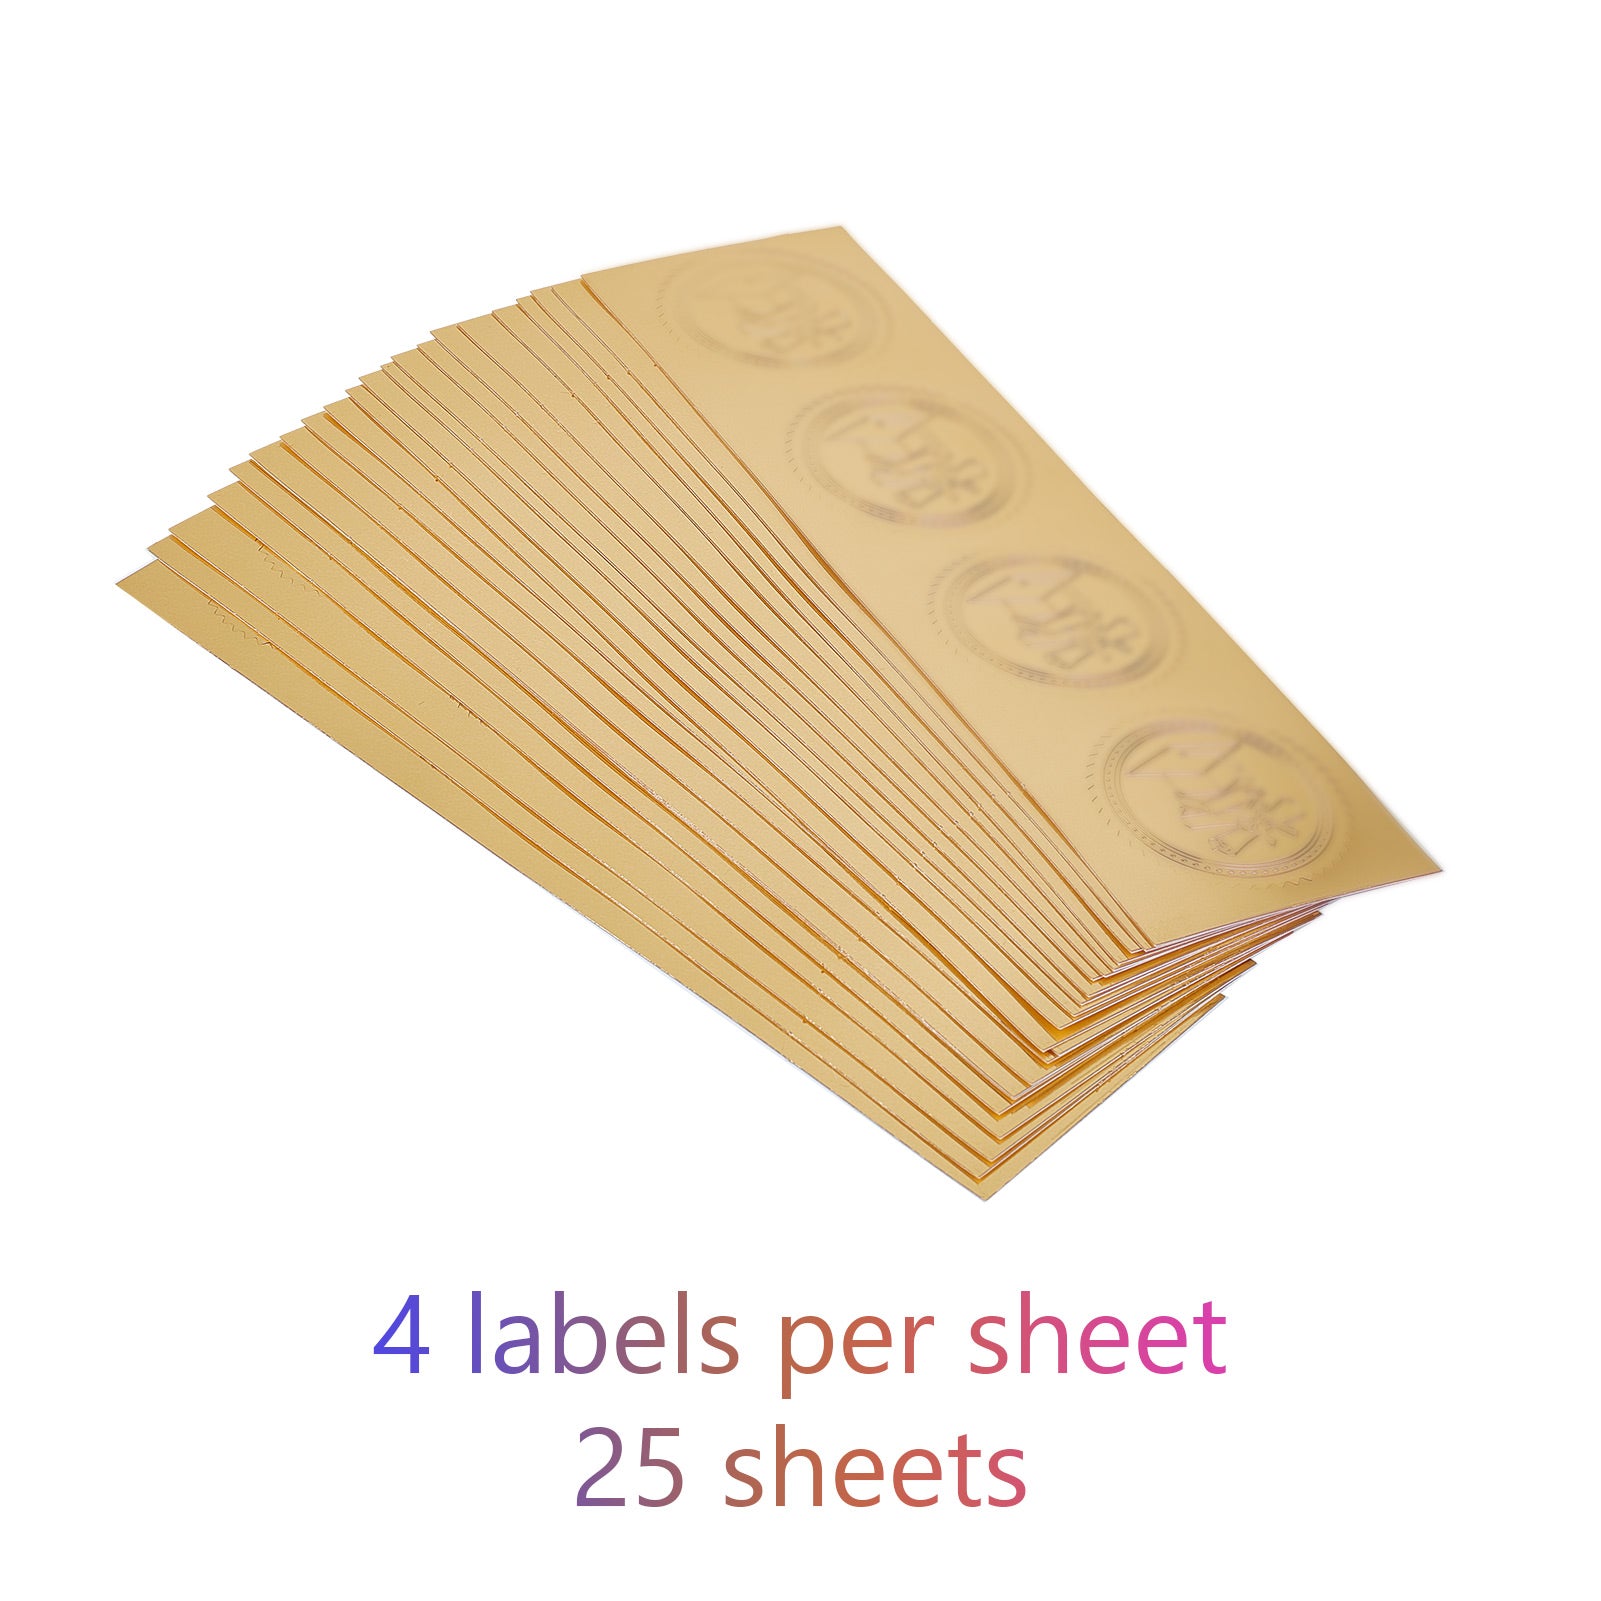 CRASPIRE 2 Inch Envelope Seals Stickers Winning Team 100pcs Embossed Foil  Seals Adhesive Gold Foil Seals Stickers